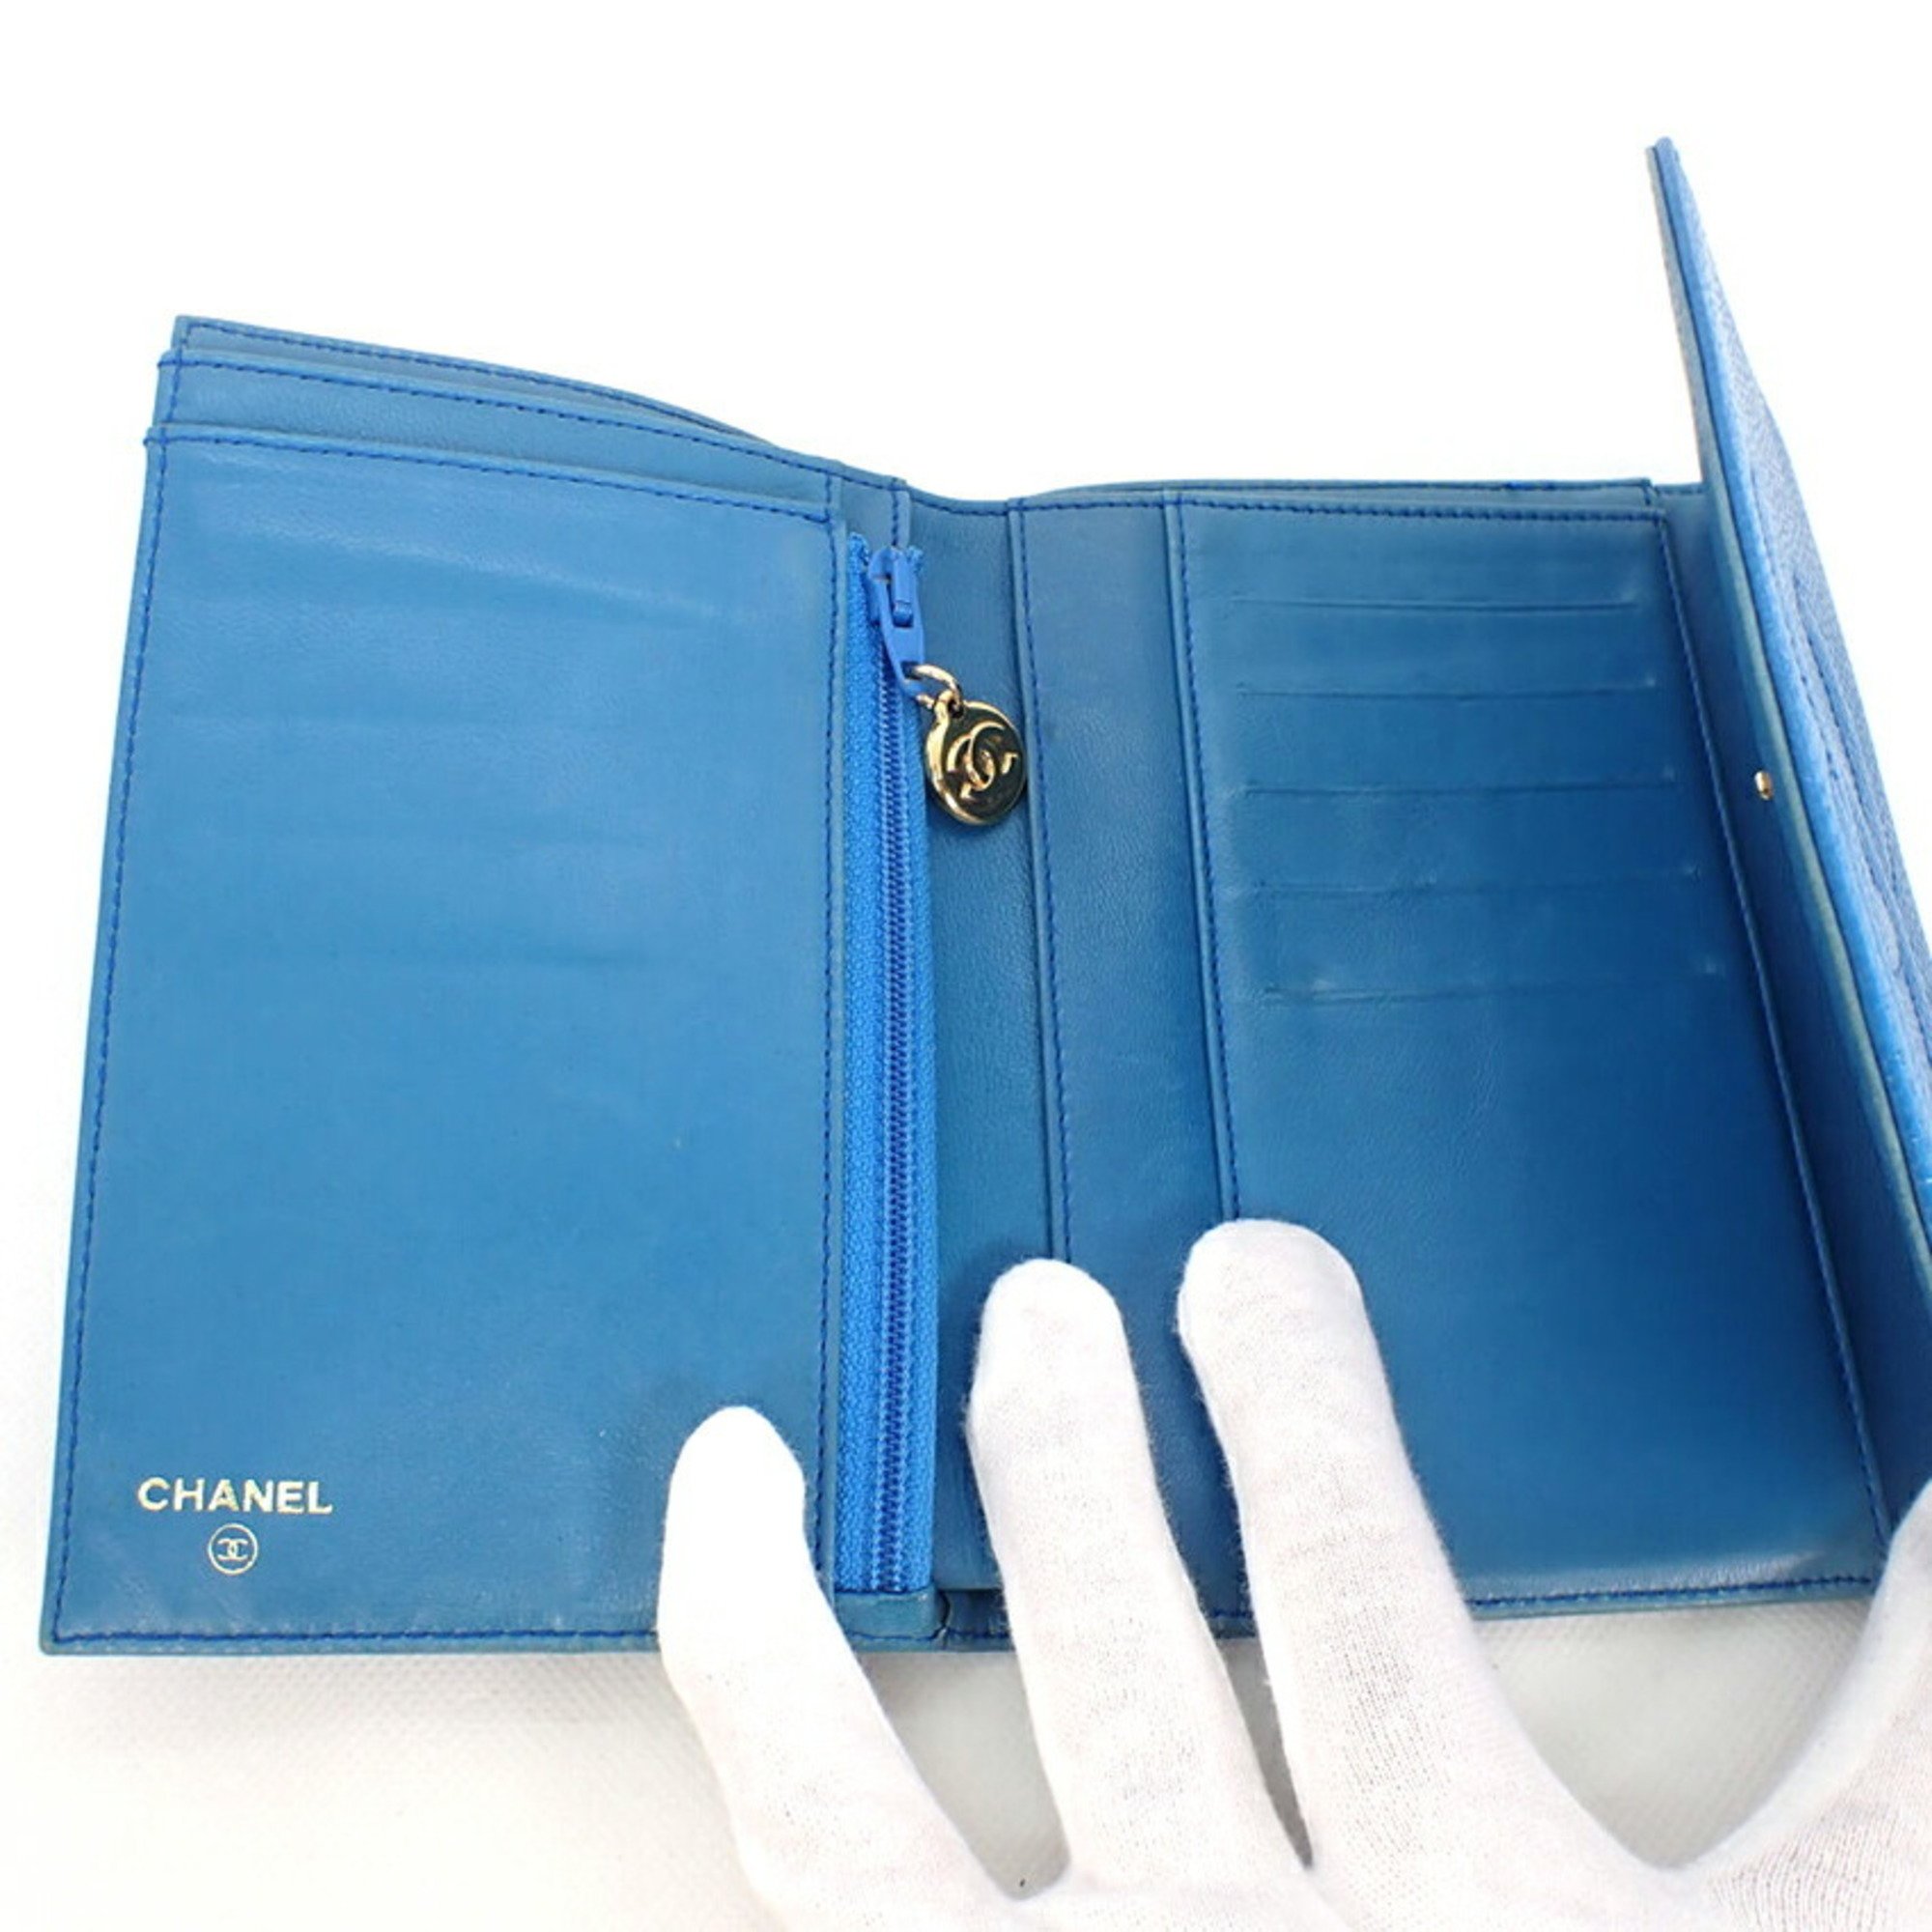 CHANEL Chanel here mark caviar skin tri-fold wallet blue with seal No. 5